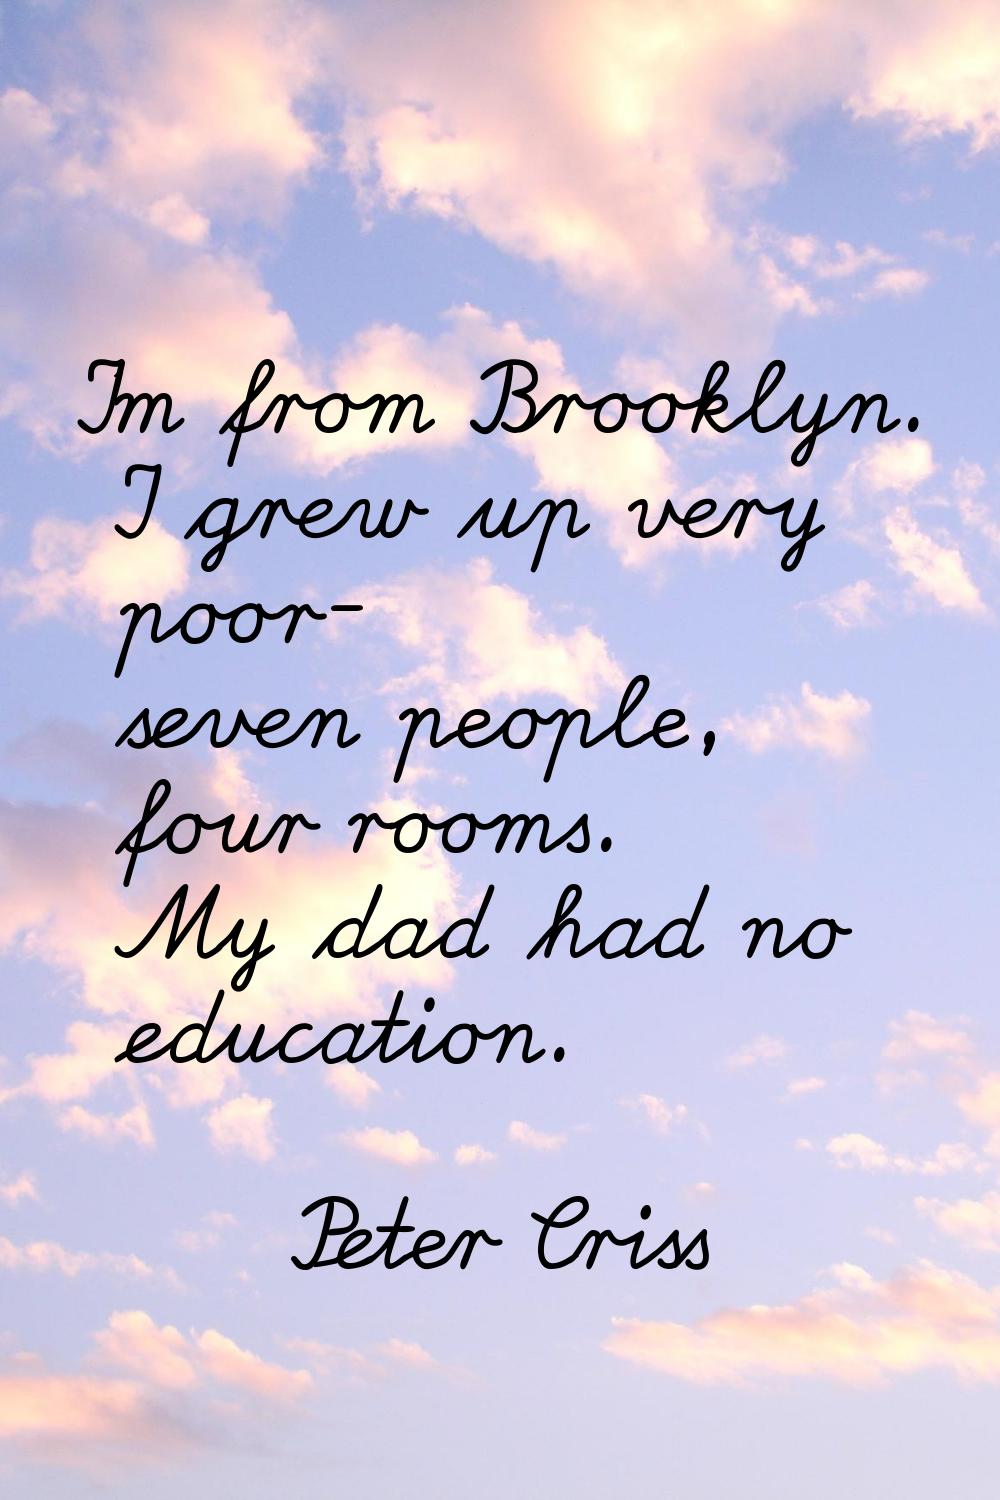 I'm from Brooklyn. I grew up very poor- seven people, four rooms. My dad had no education.